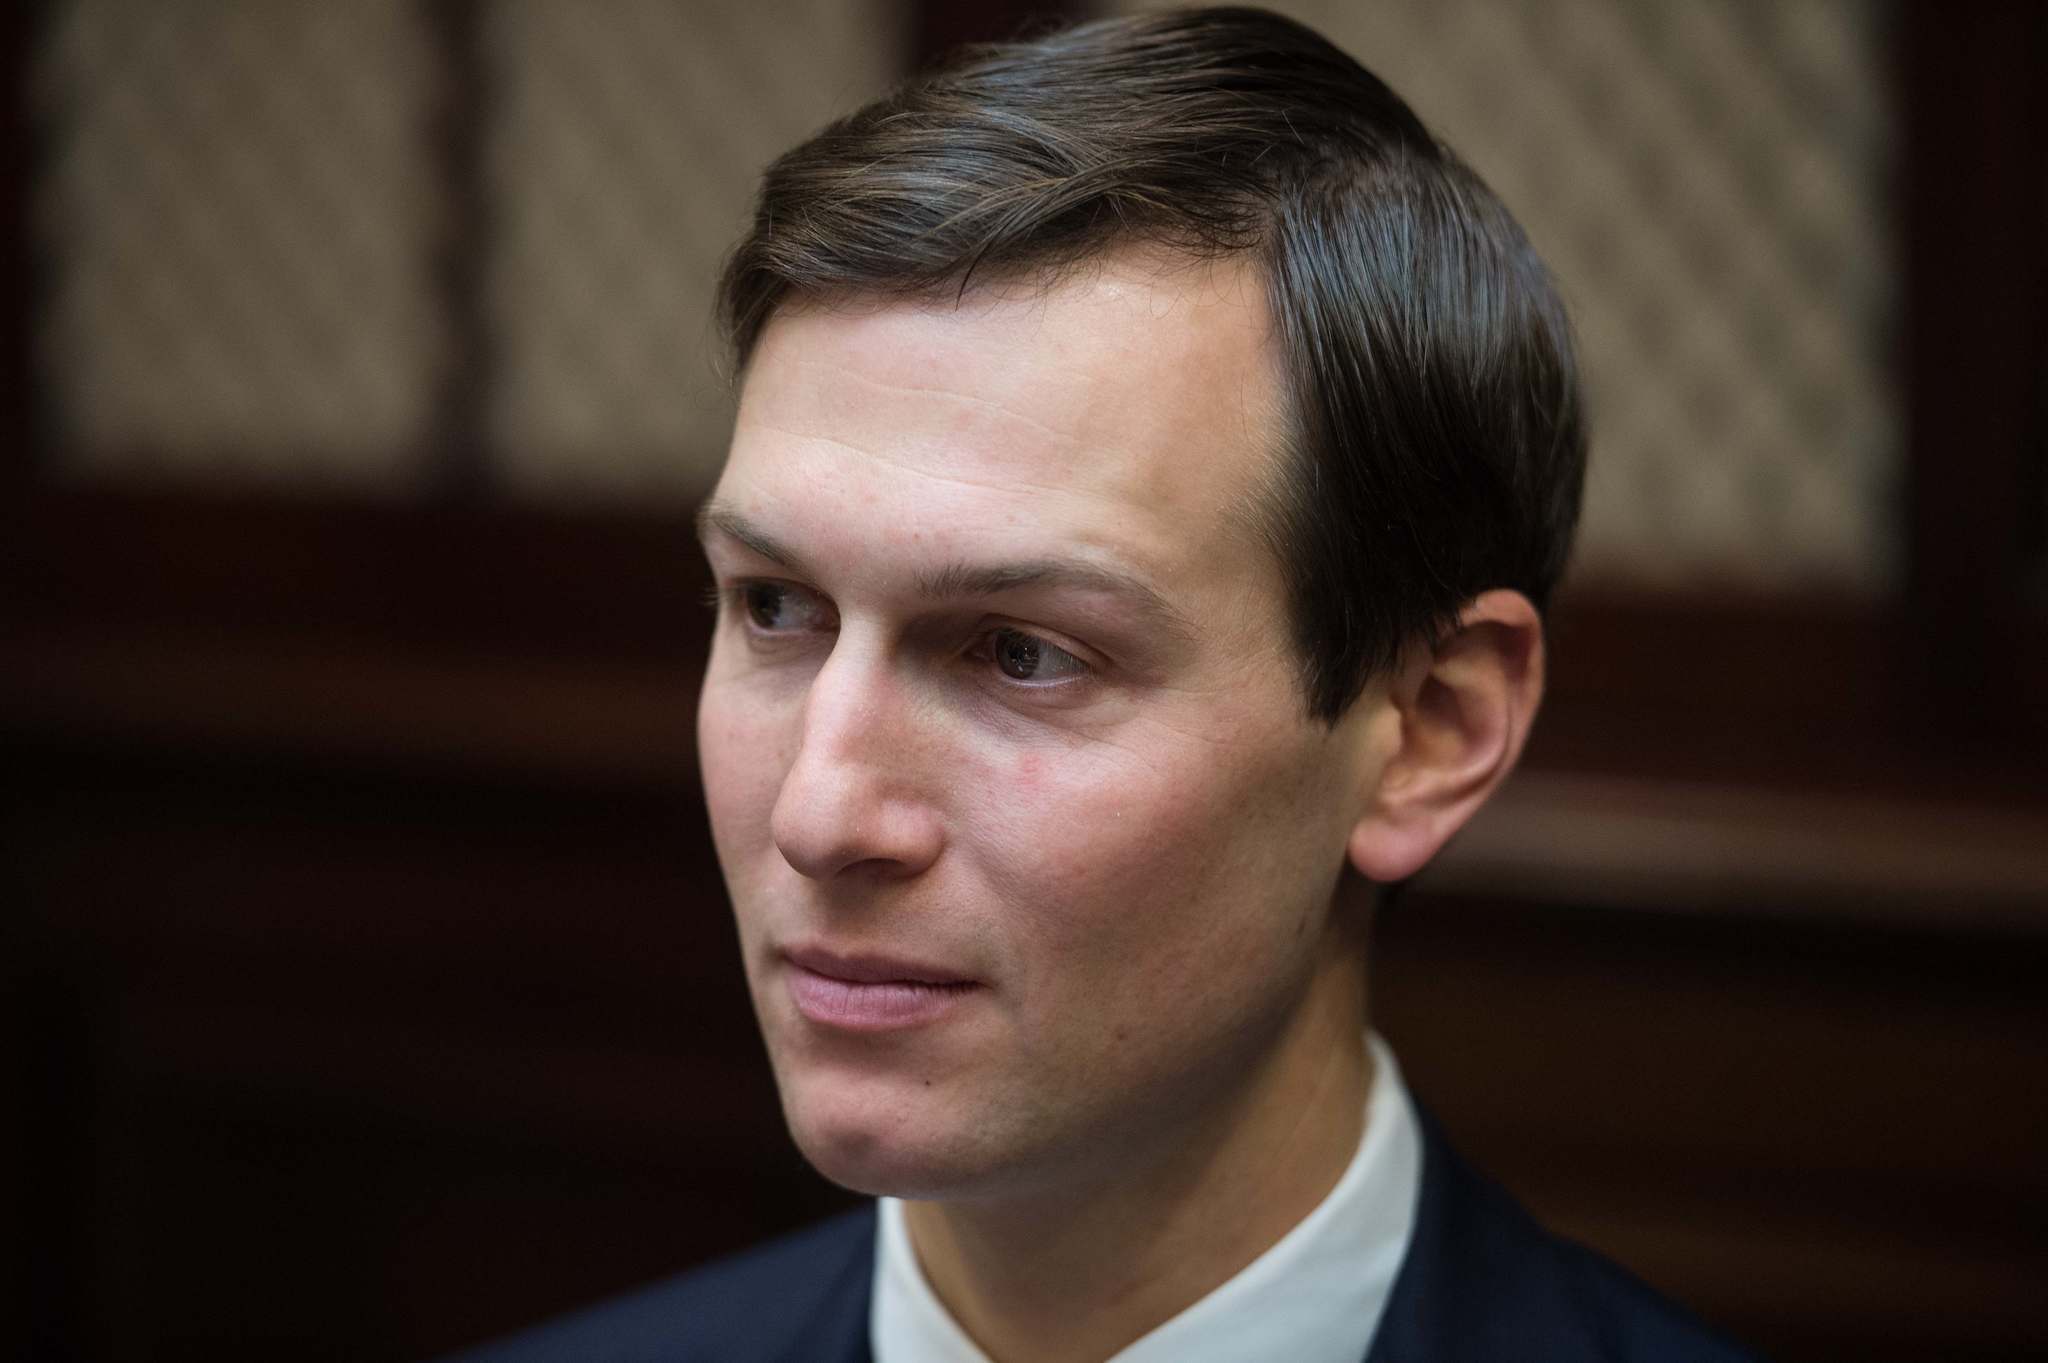 As White House defends Kushner, experts question his back-channel move